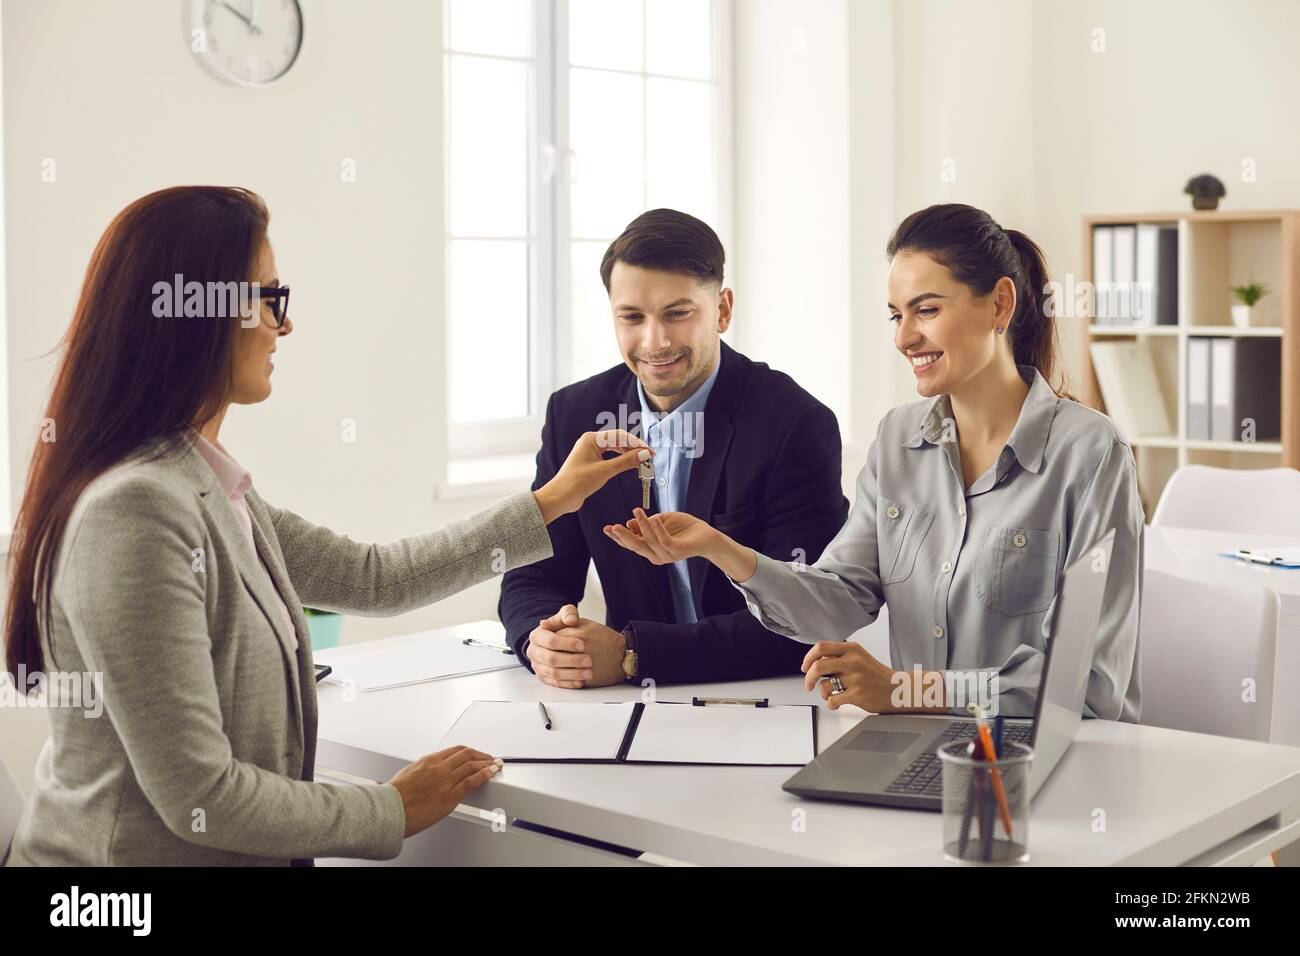 Real estate agent gives the keys to her new home to a married couple at a meeting in the office. Stock Photo